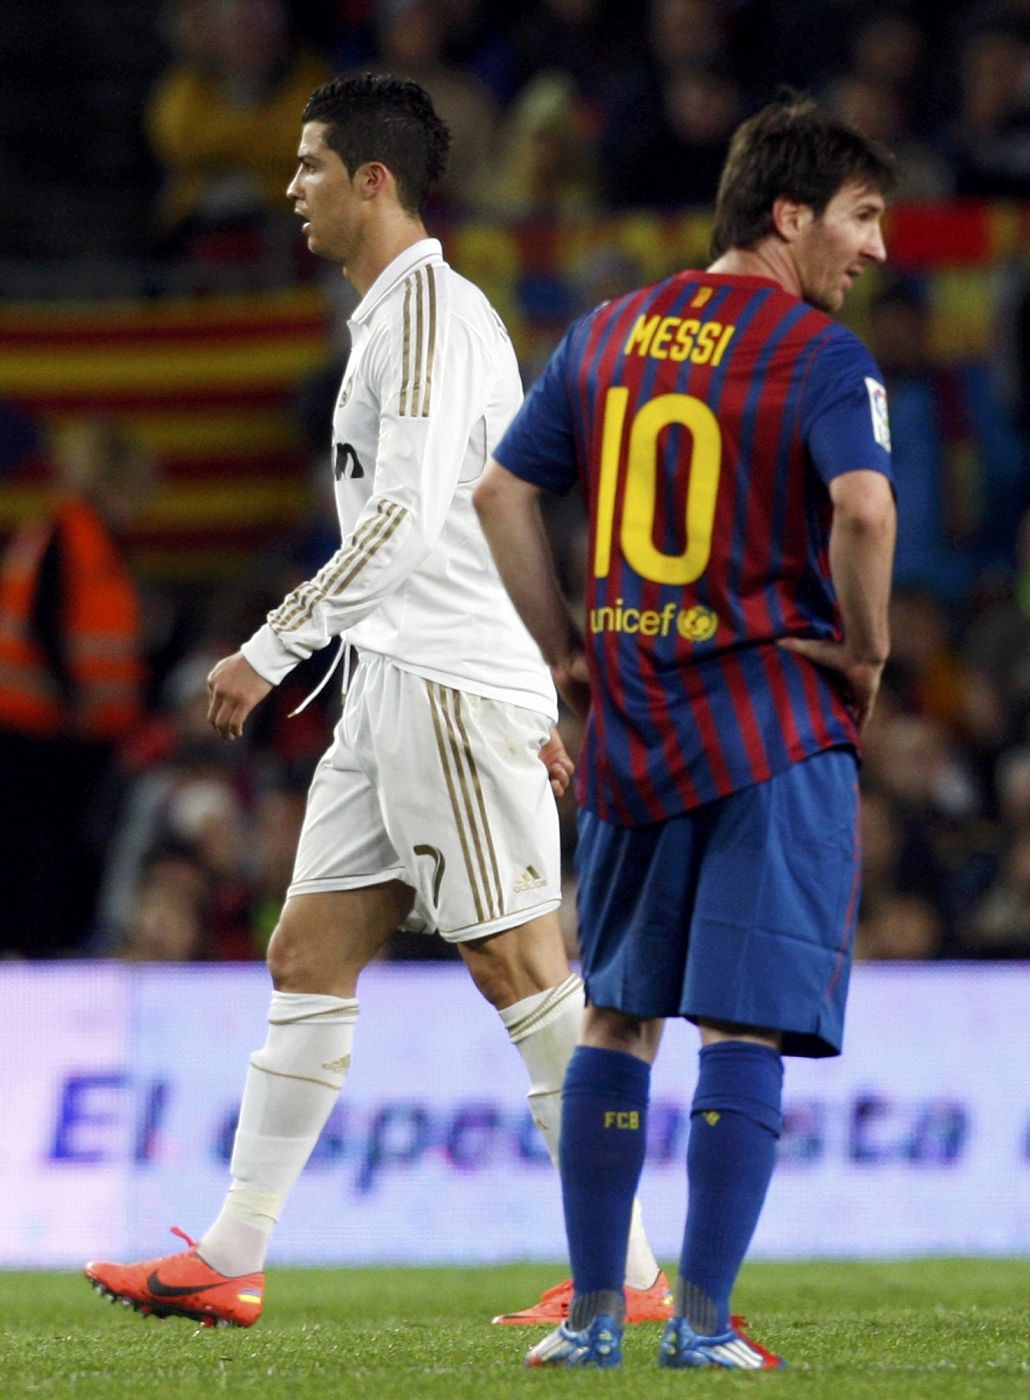 Real Madrid's Ronaldo walks past Barcelona's Messi after scoring his goal during their Spanish first division "El Clasico" soccer match